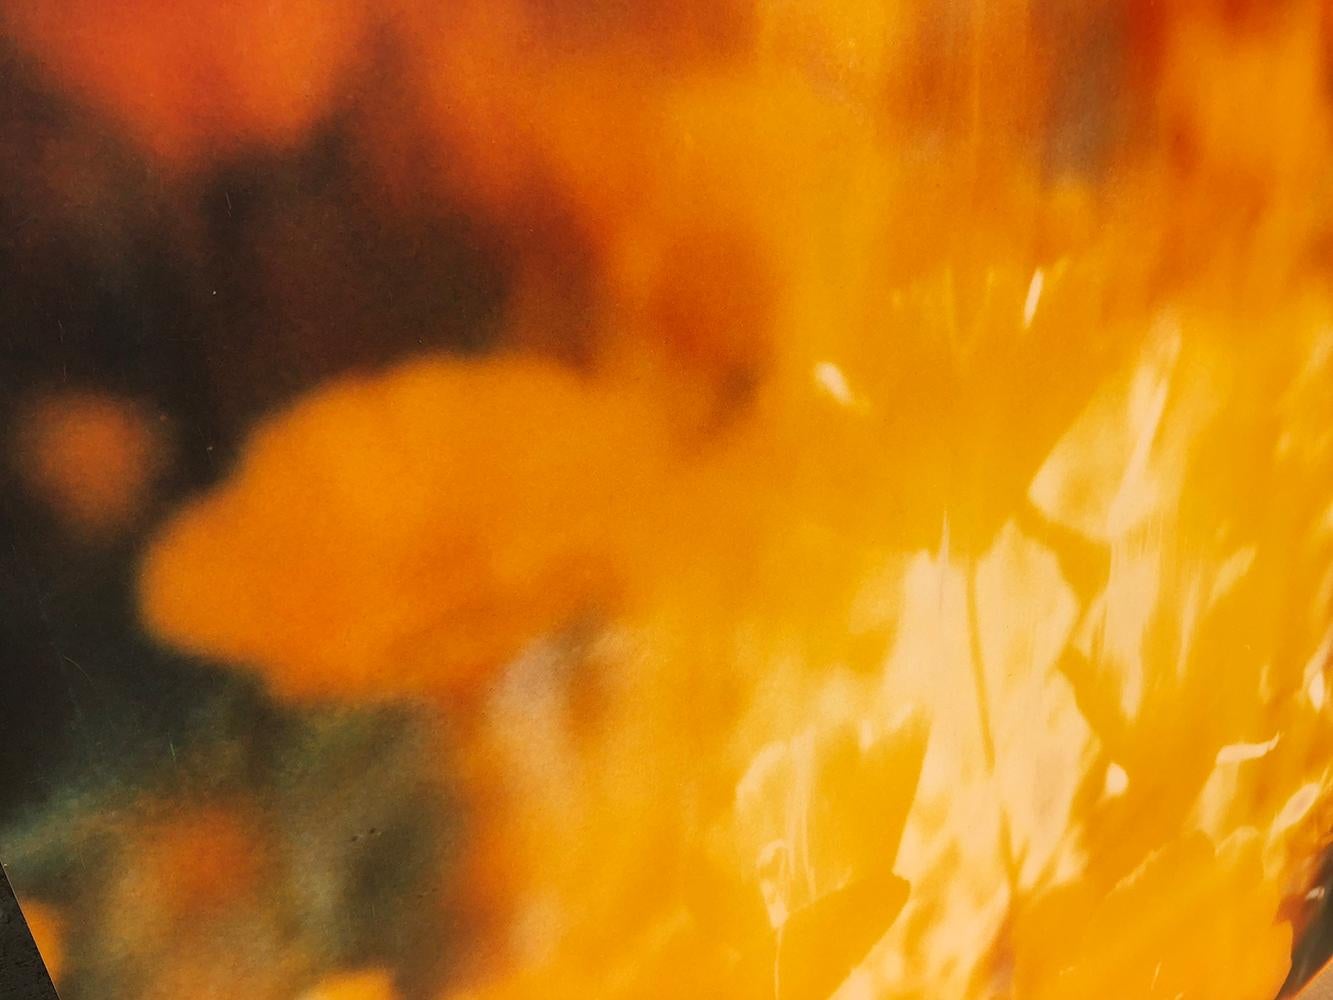 Yellow Flower (The Last Picture Show) - Polaroid - Contemporary Photograph by Stefanie Schneider